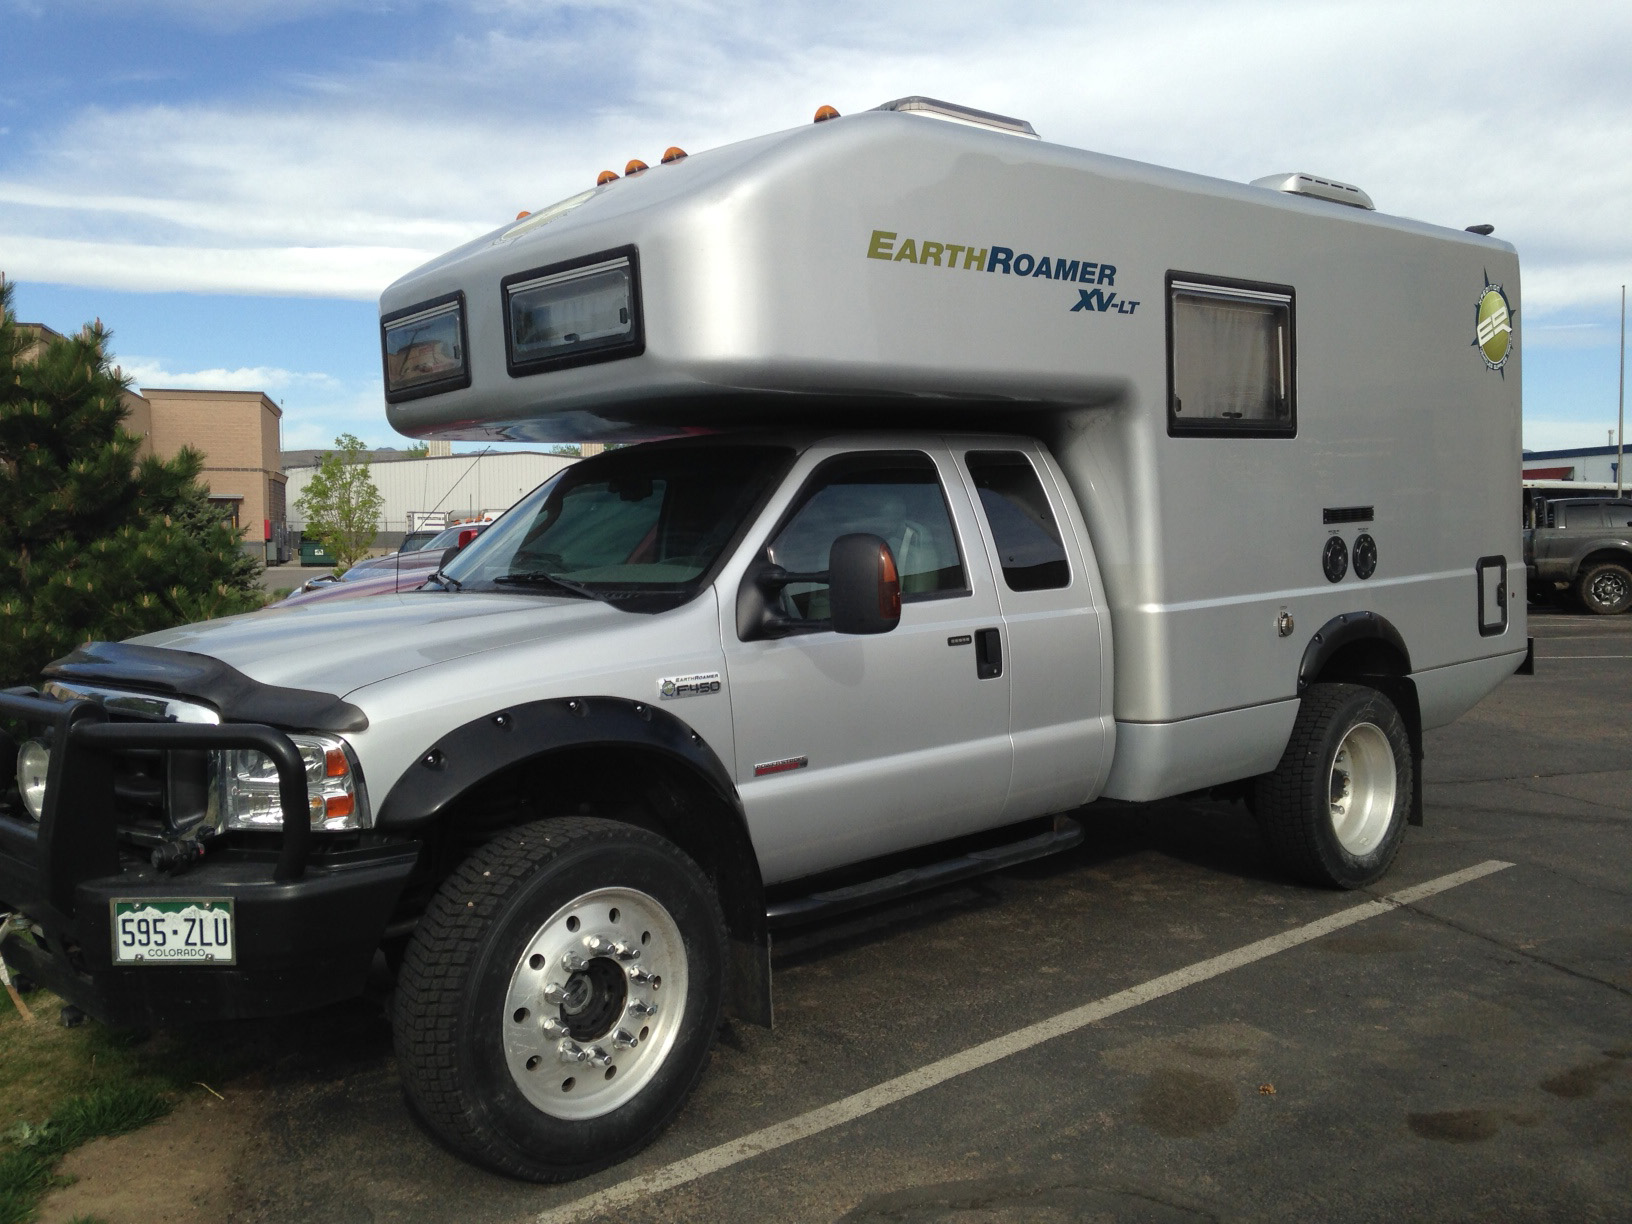 Spotted: The EarthRoamer XV-LT Is A Rarely Seen, Completely Awesome, And Big Dollar Go Anywhere RV